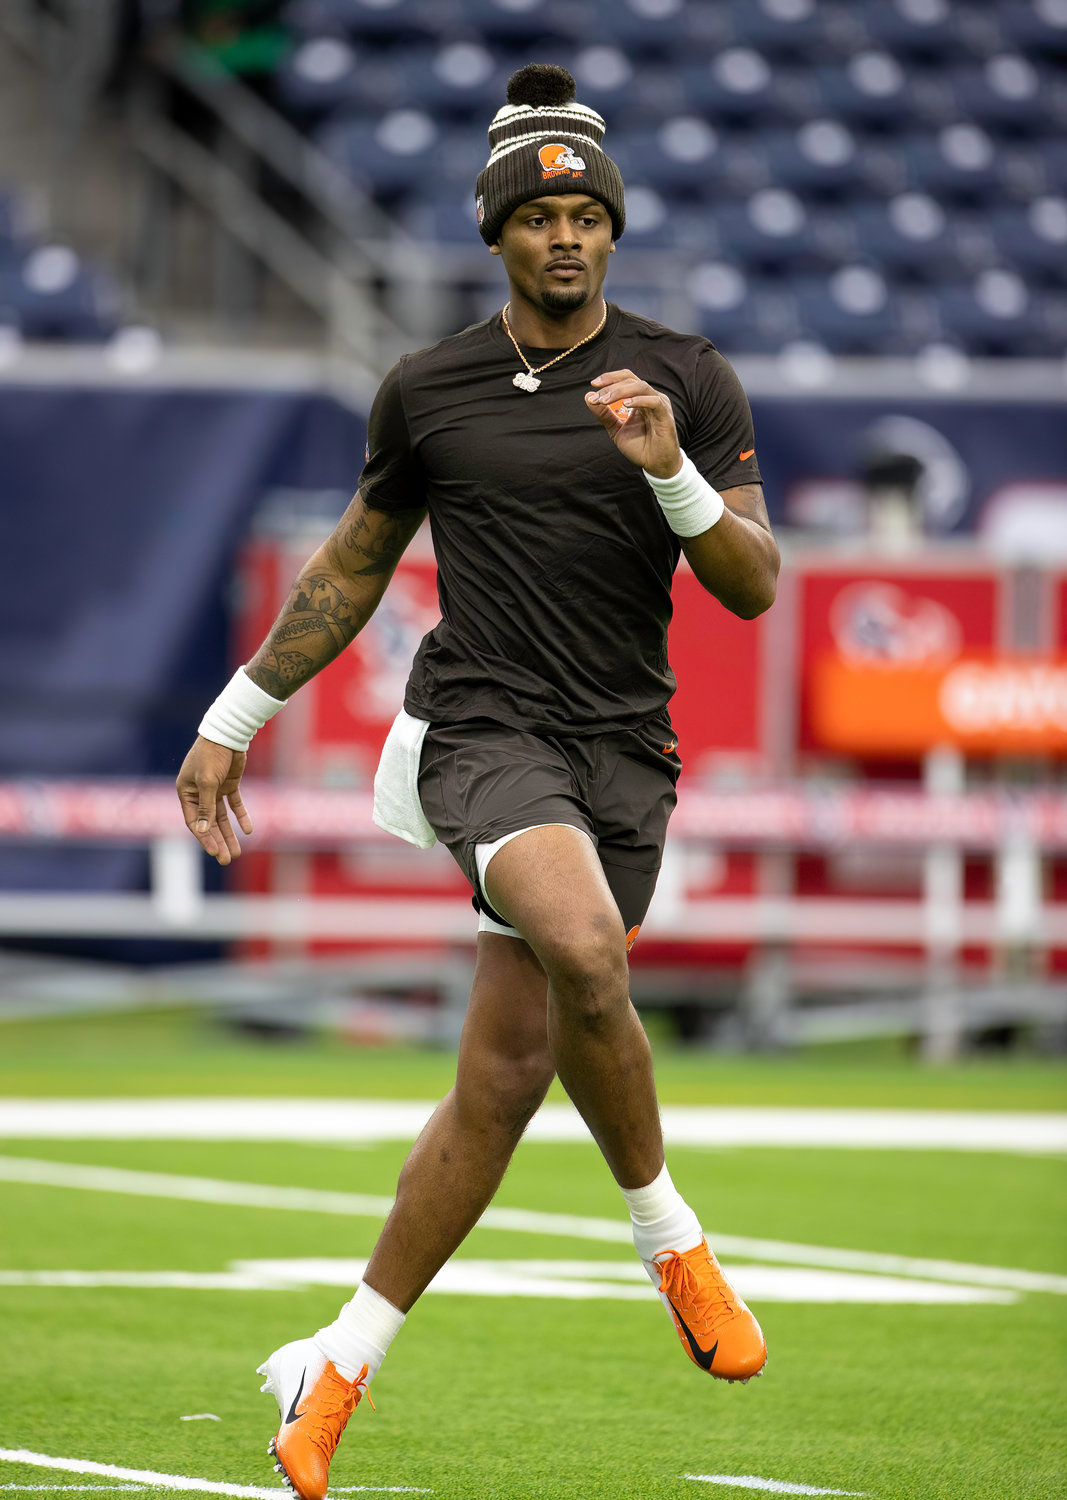 Former Houston Texans and current Cleveland Browns quarterback Deshaun Watson warms up before an NFL game on Dec. 4, 2022, in Houston. The game marks the controversial quarterback’s return to Houston and first game back after an 11-game suspension for allegations of sexual misconduct during his tenure with the Texans.